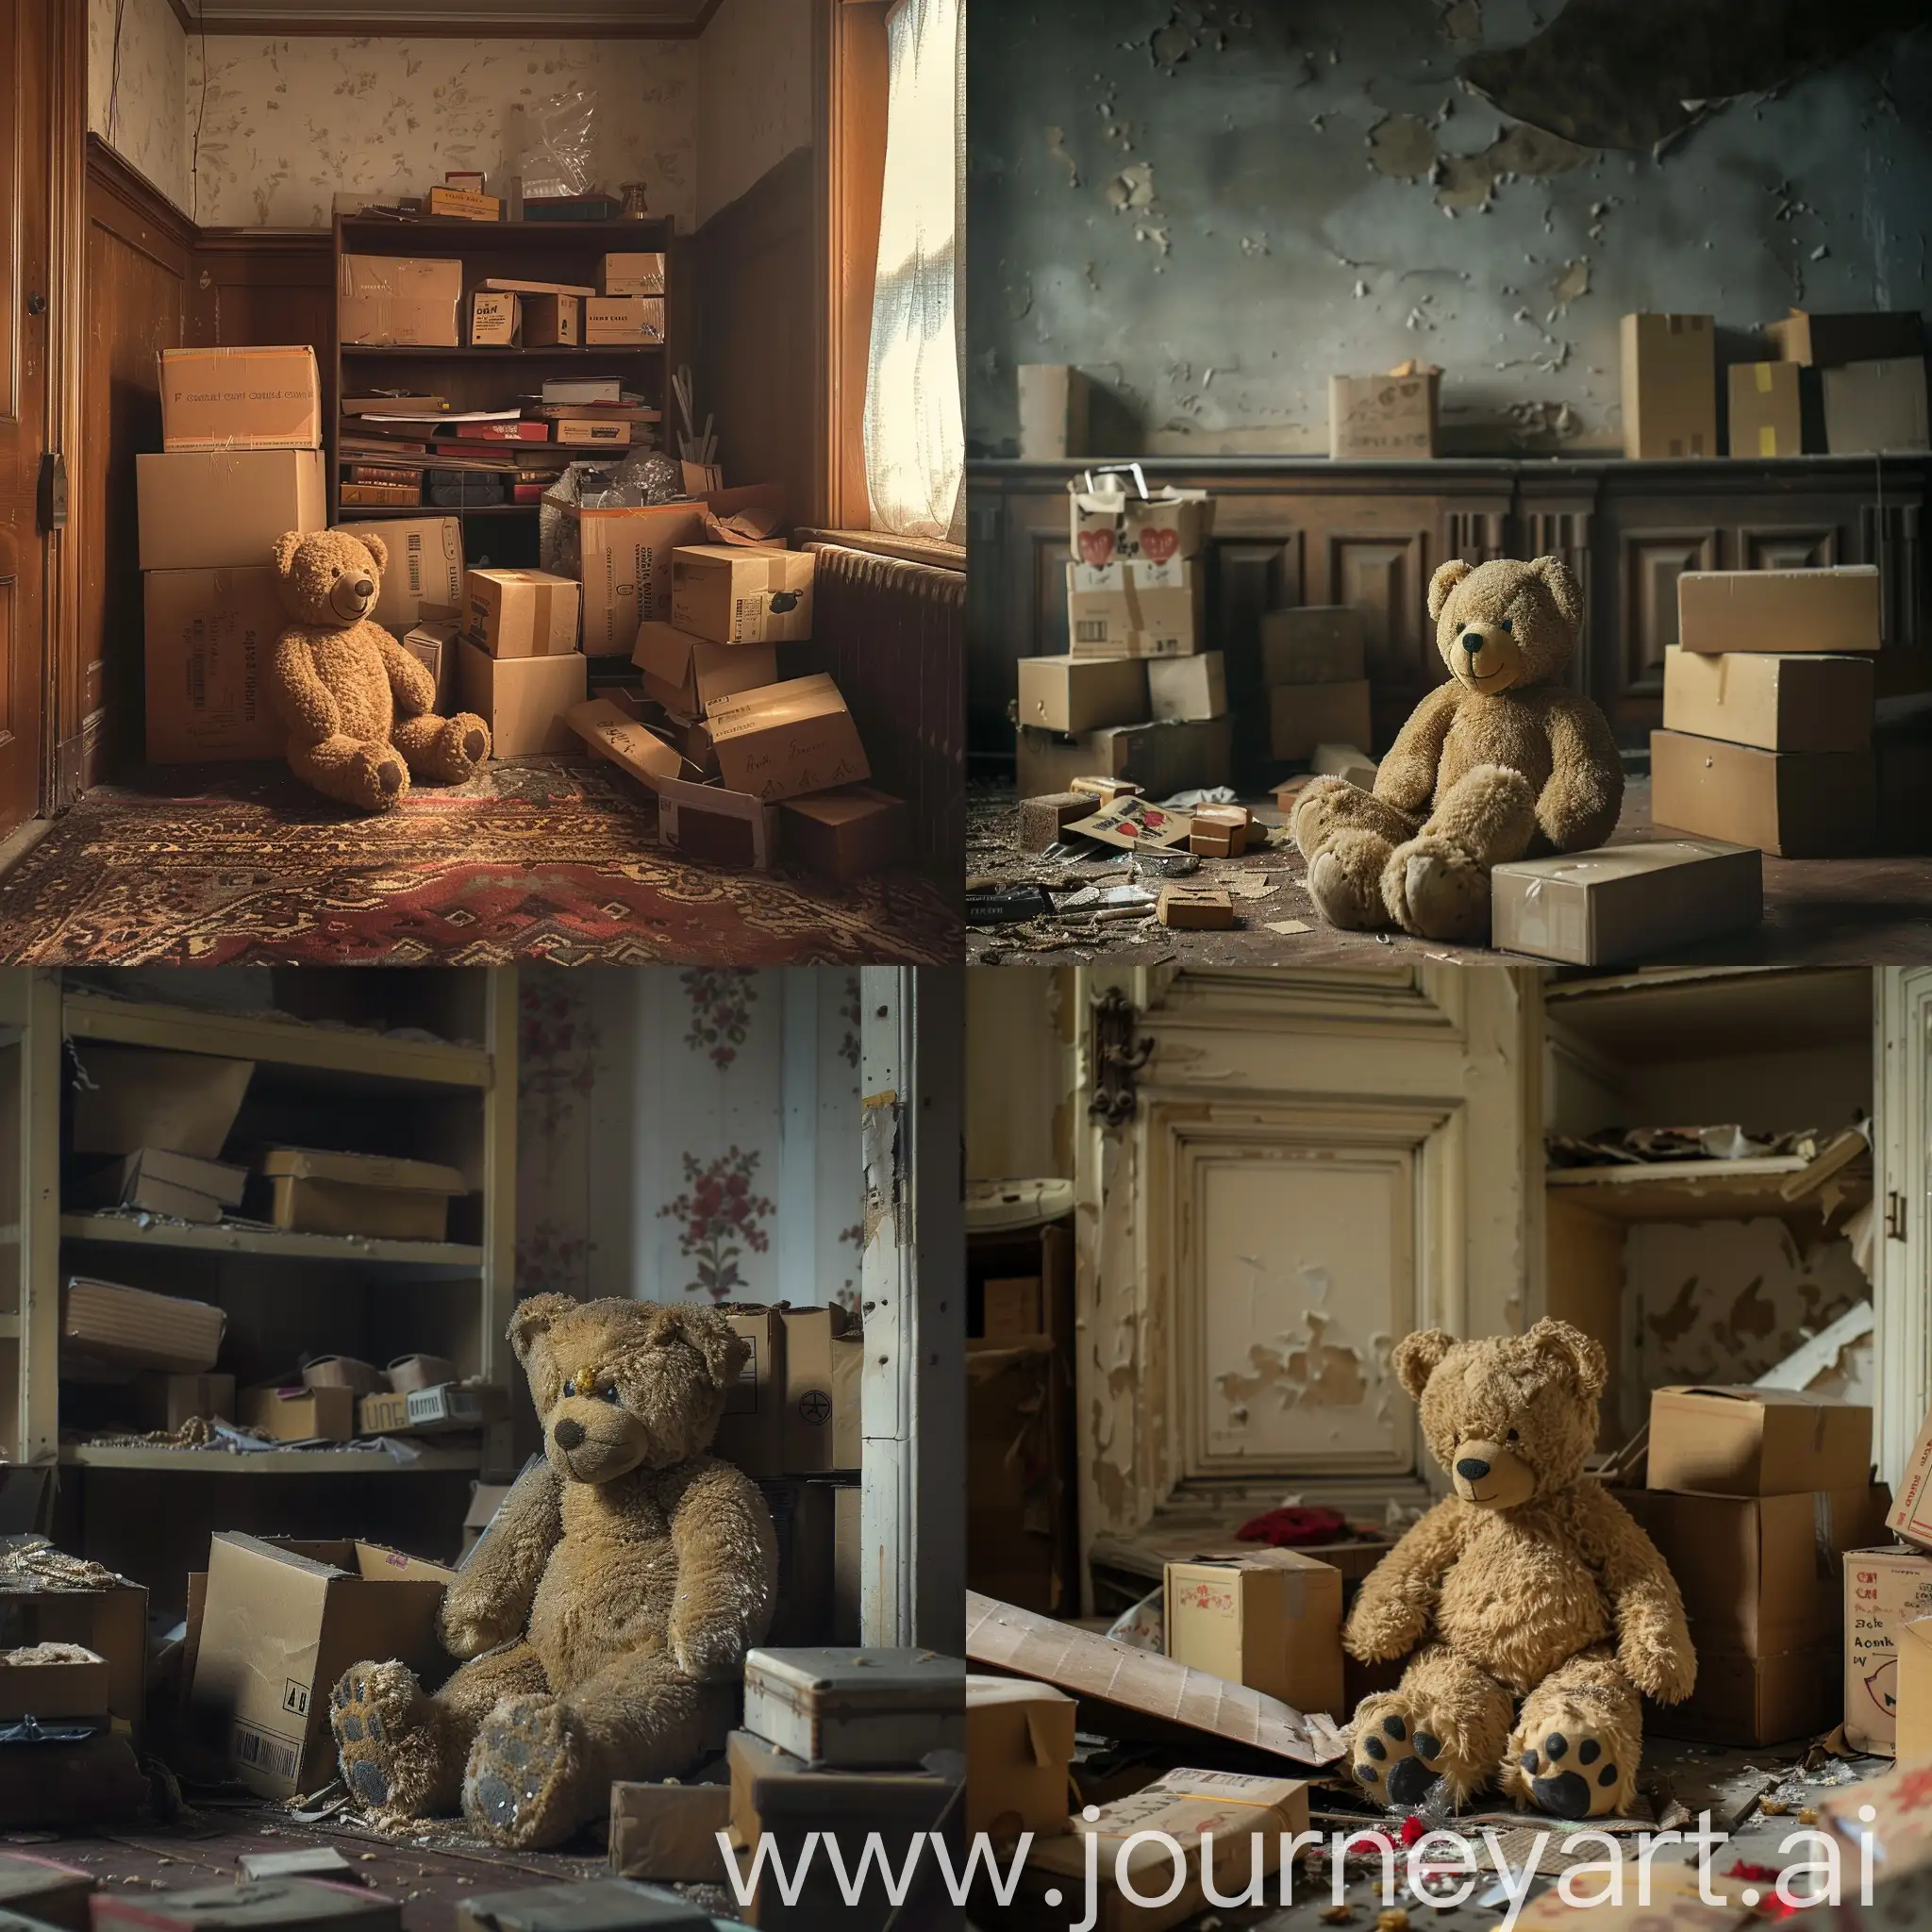 an old teddy bear sit in the corner of the room with a lot of box in the room,no light room